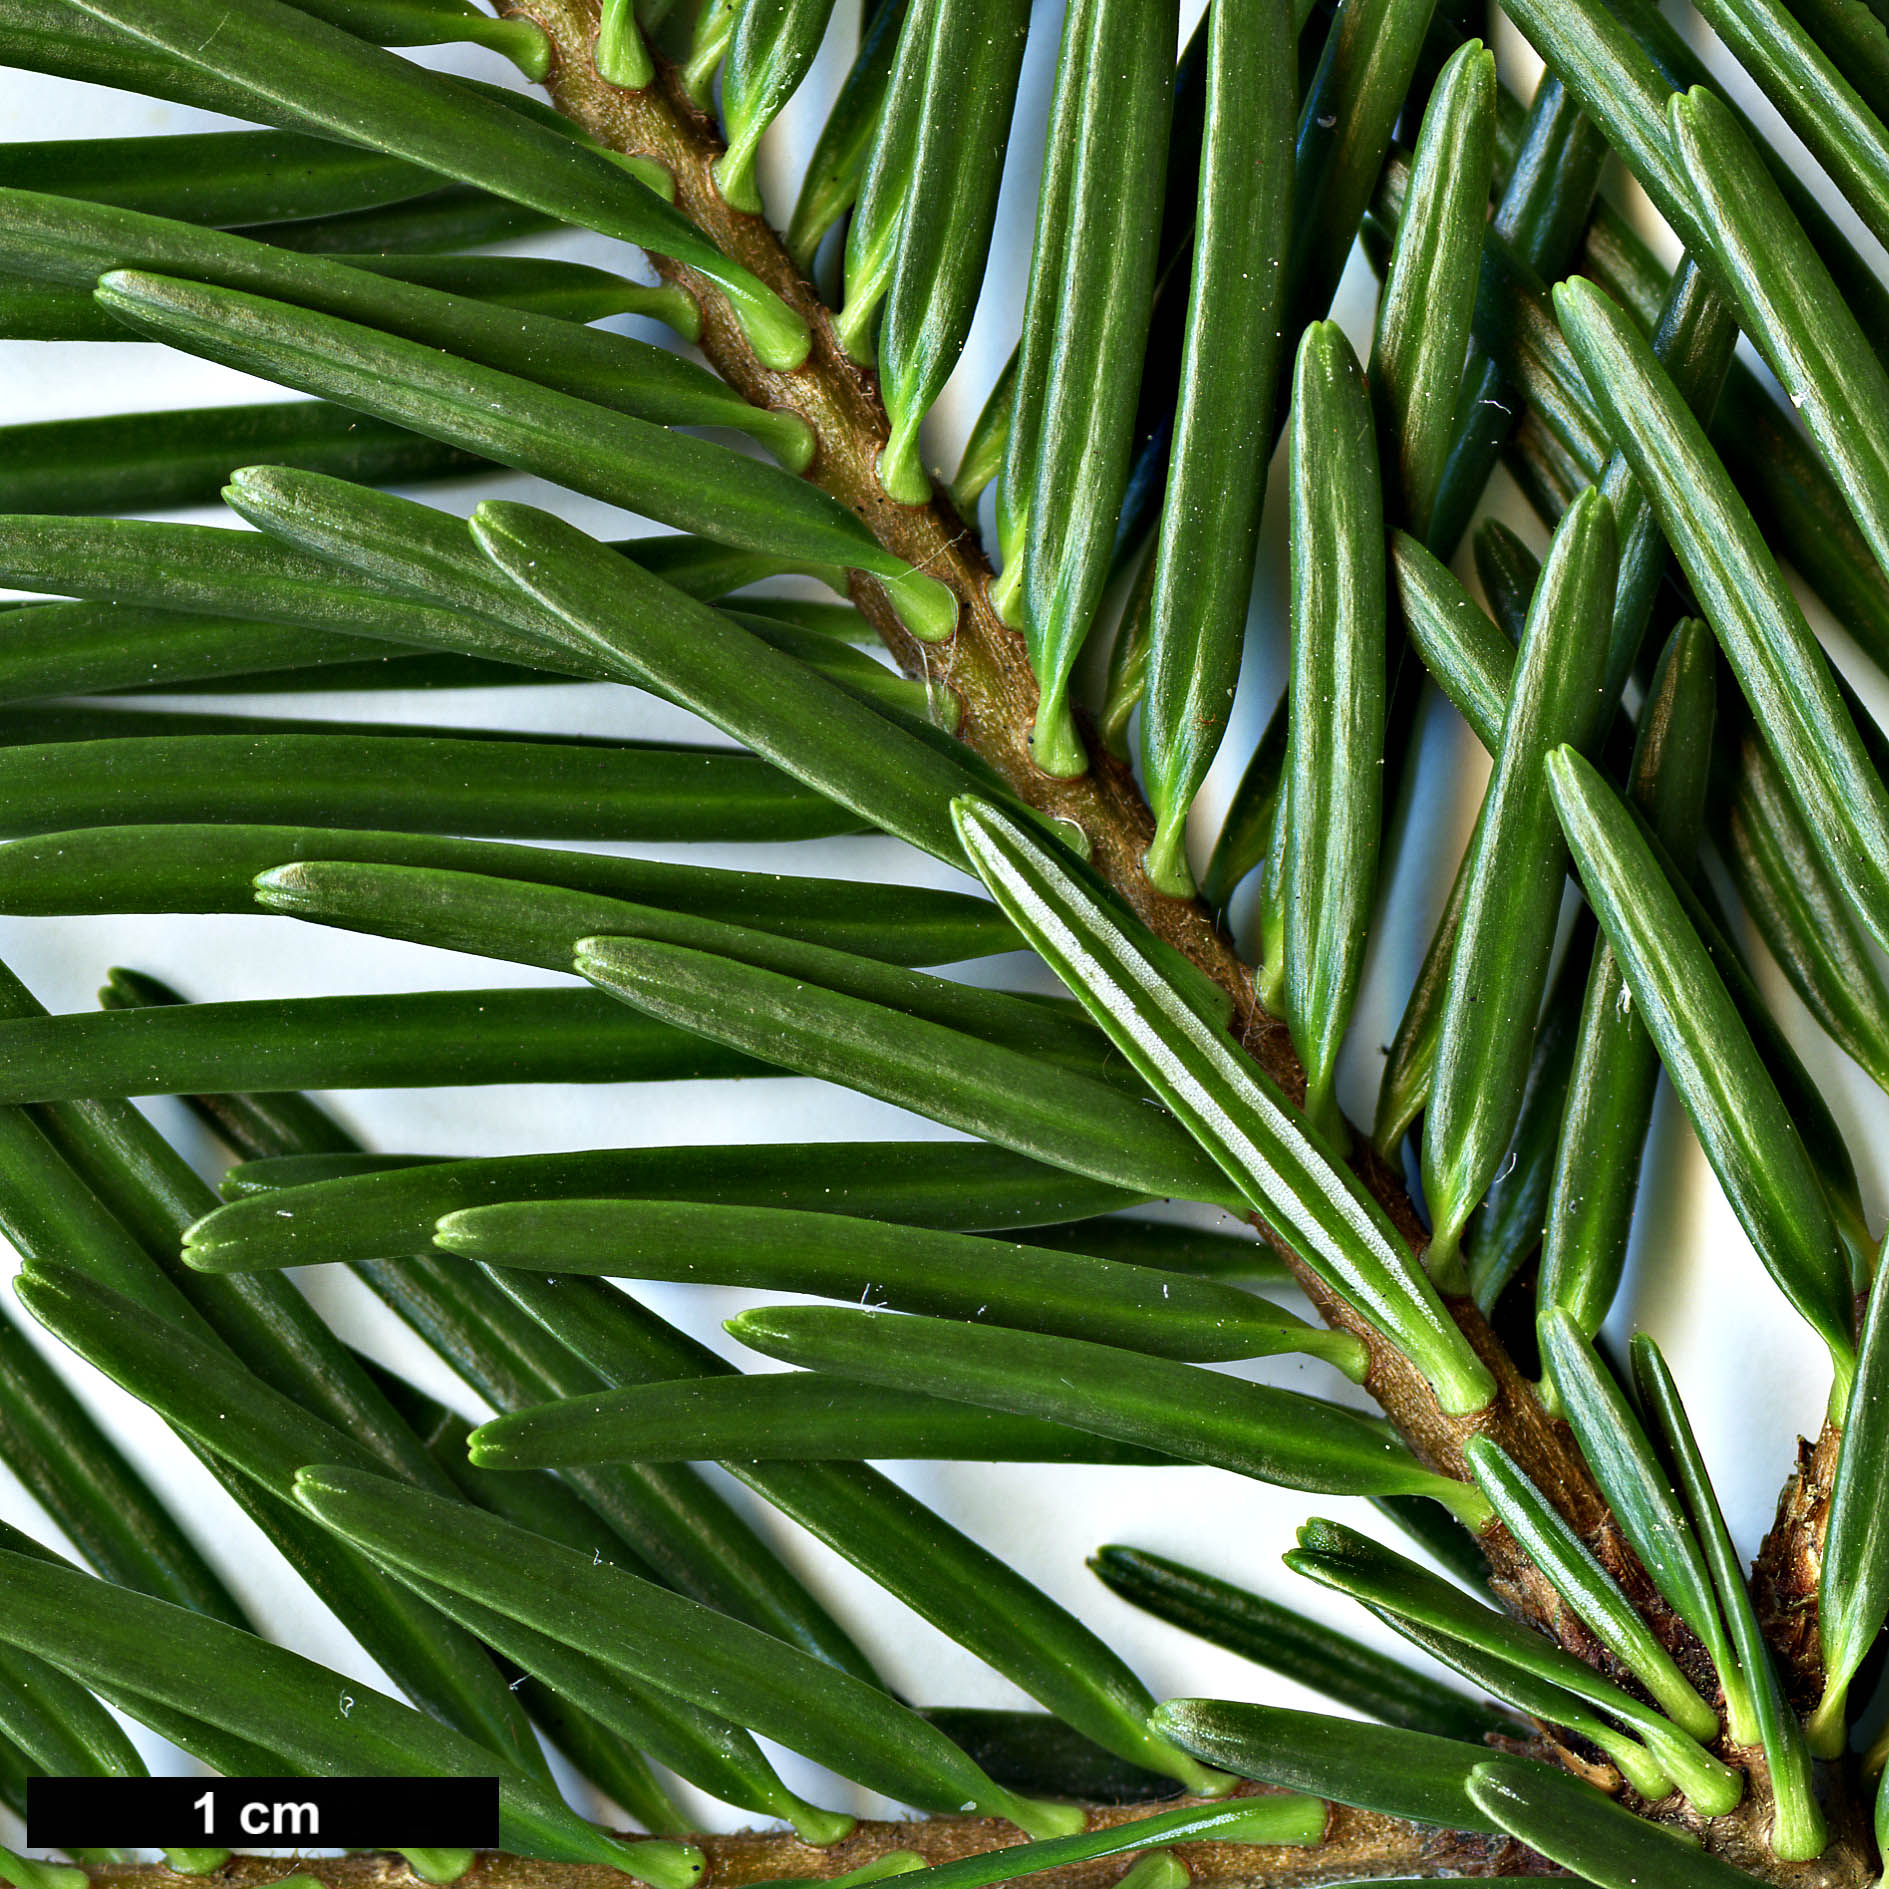 High resolution image: Family: Pinaceae - Genus: Abies - Taxon: cilicica